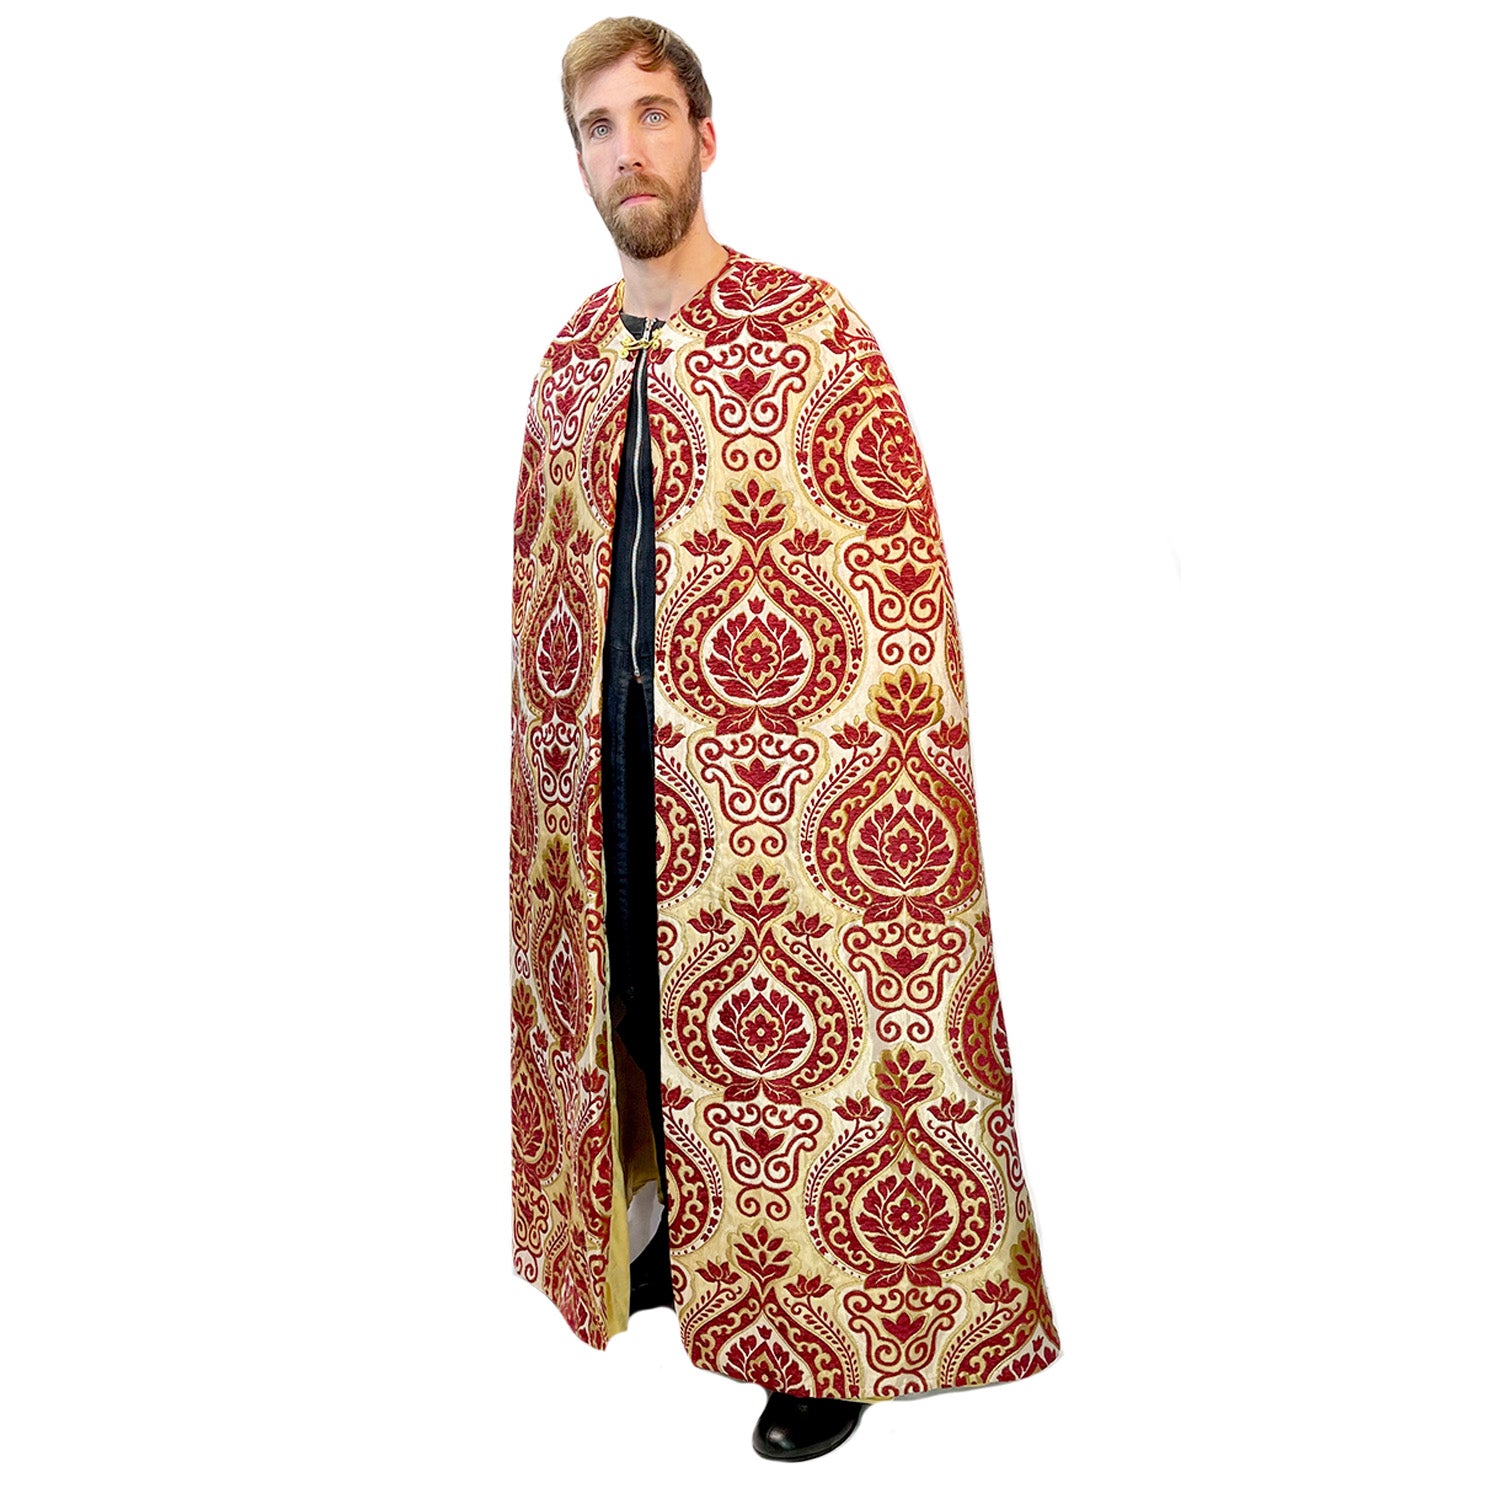 Deluxe Burgundy and Gold Standard Adult Cape